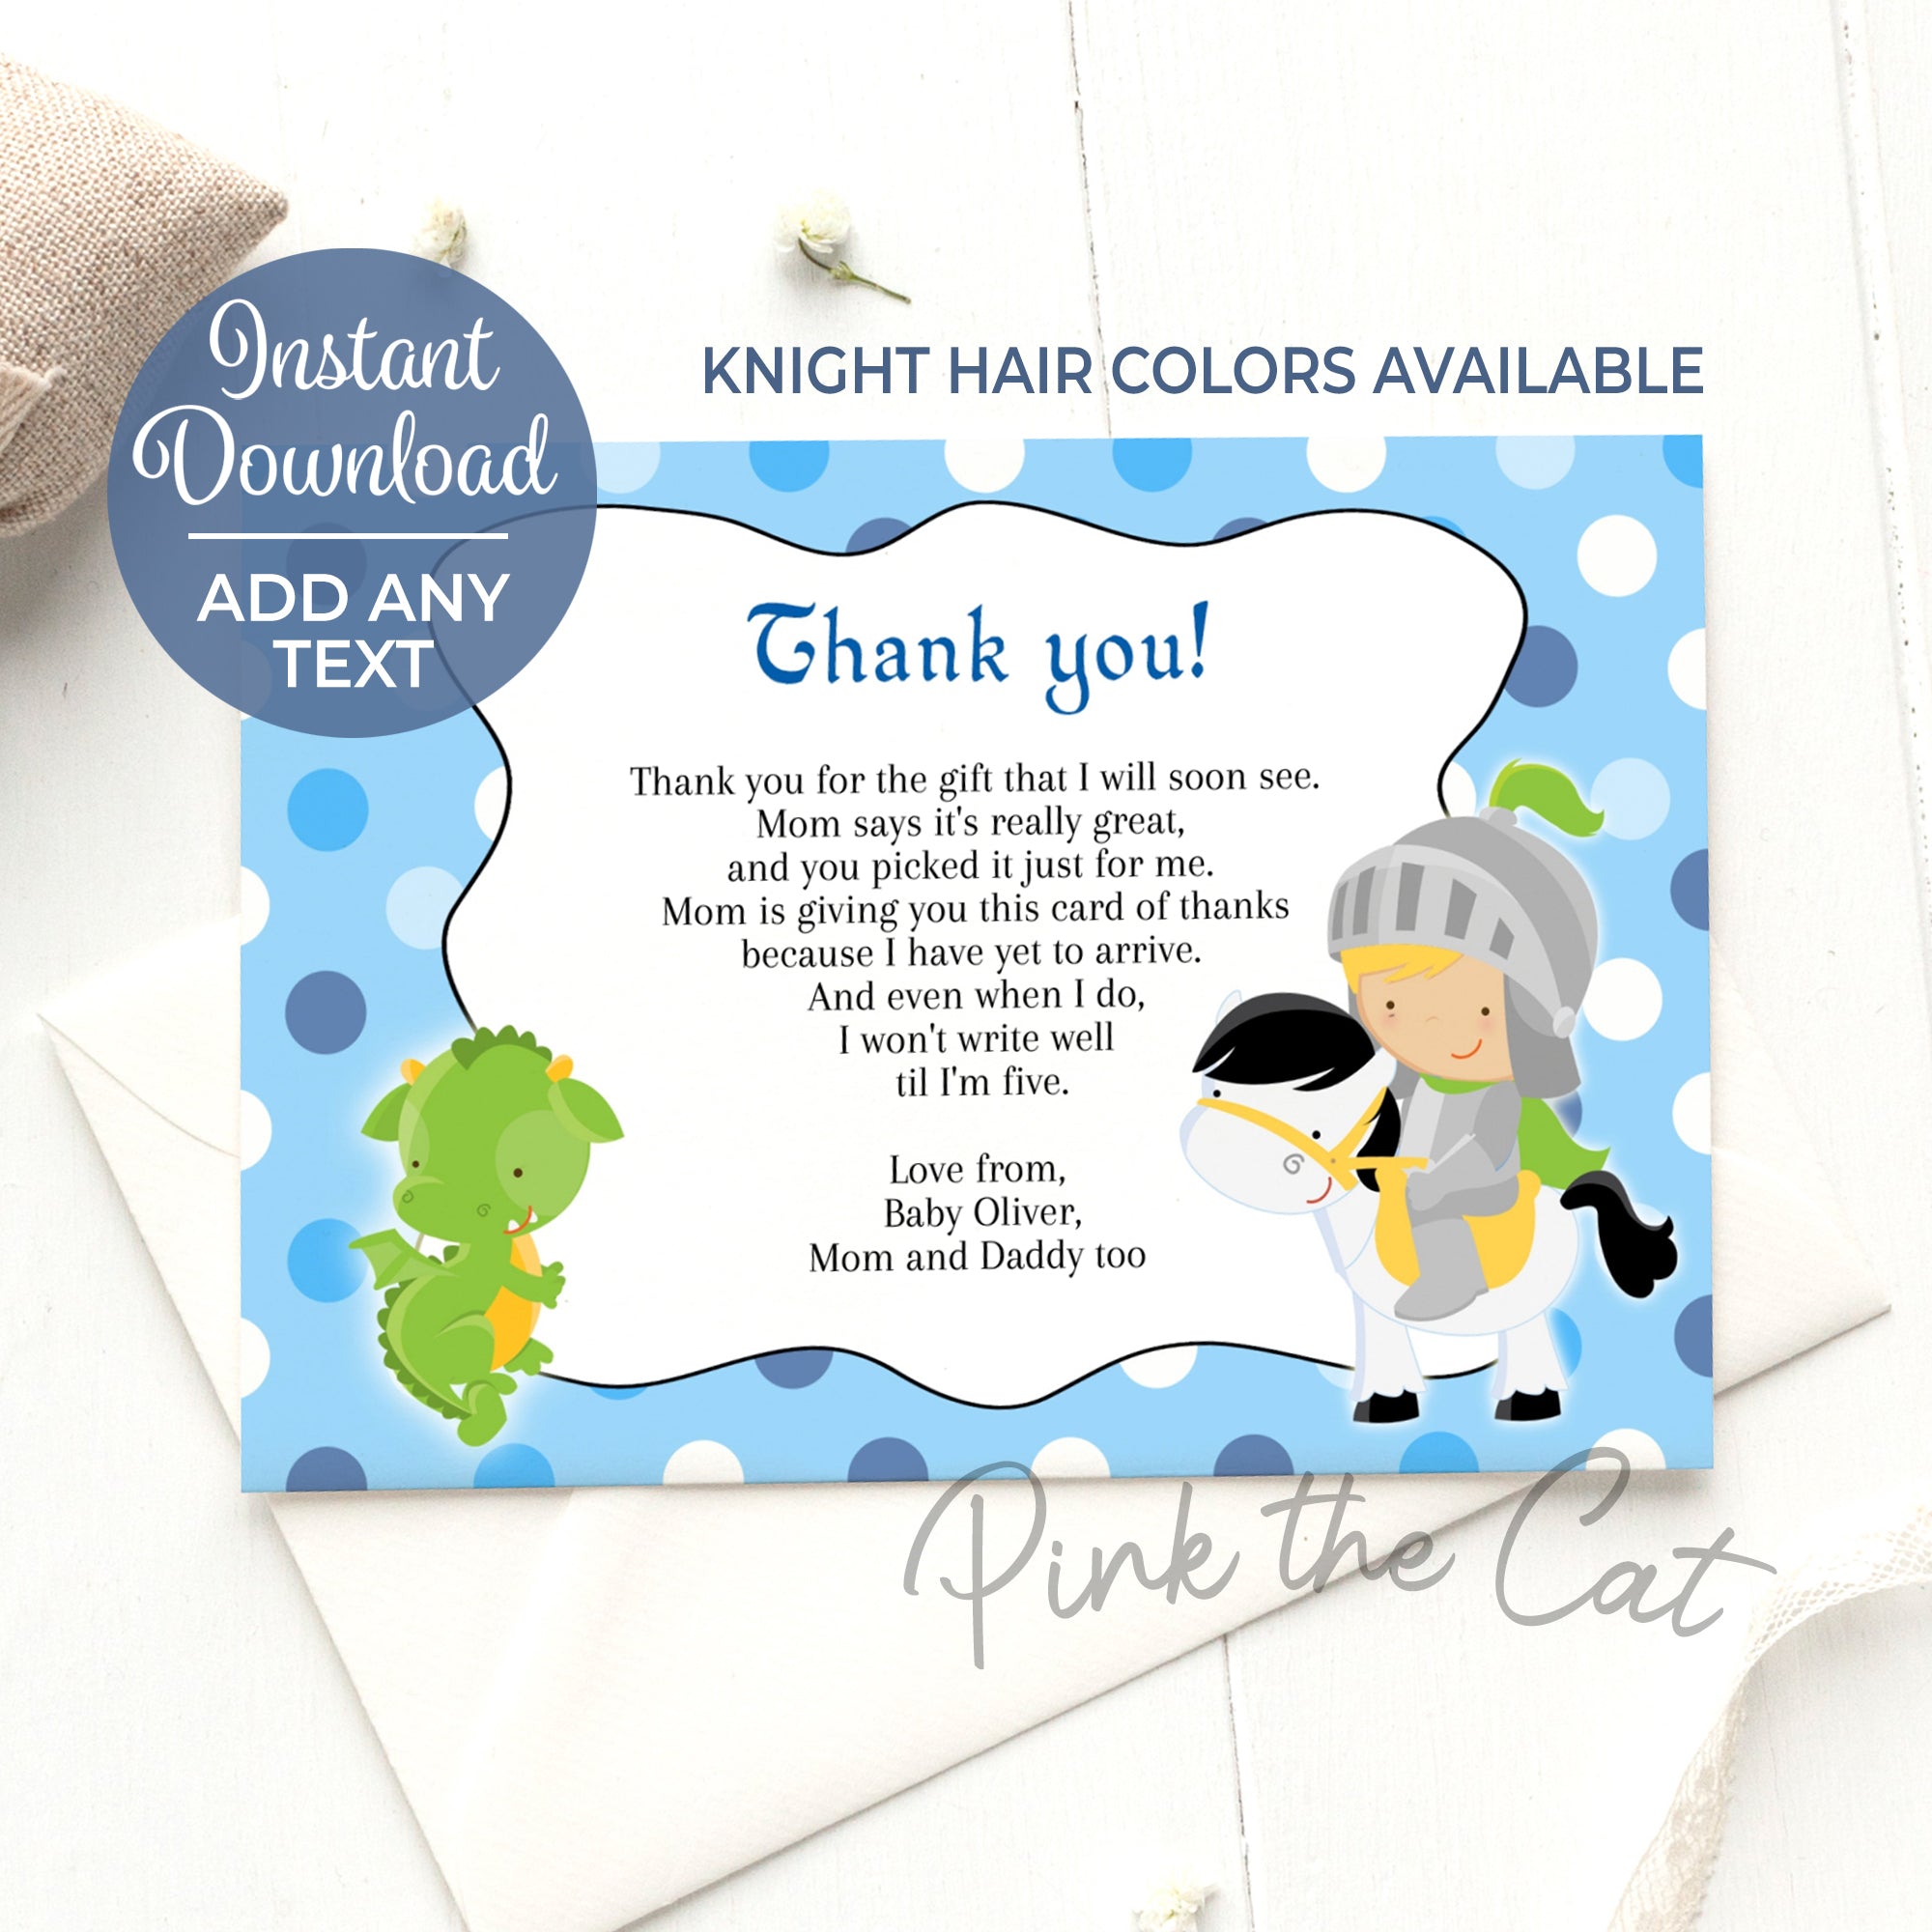 Knight dragon thank you card birthday or baby shower